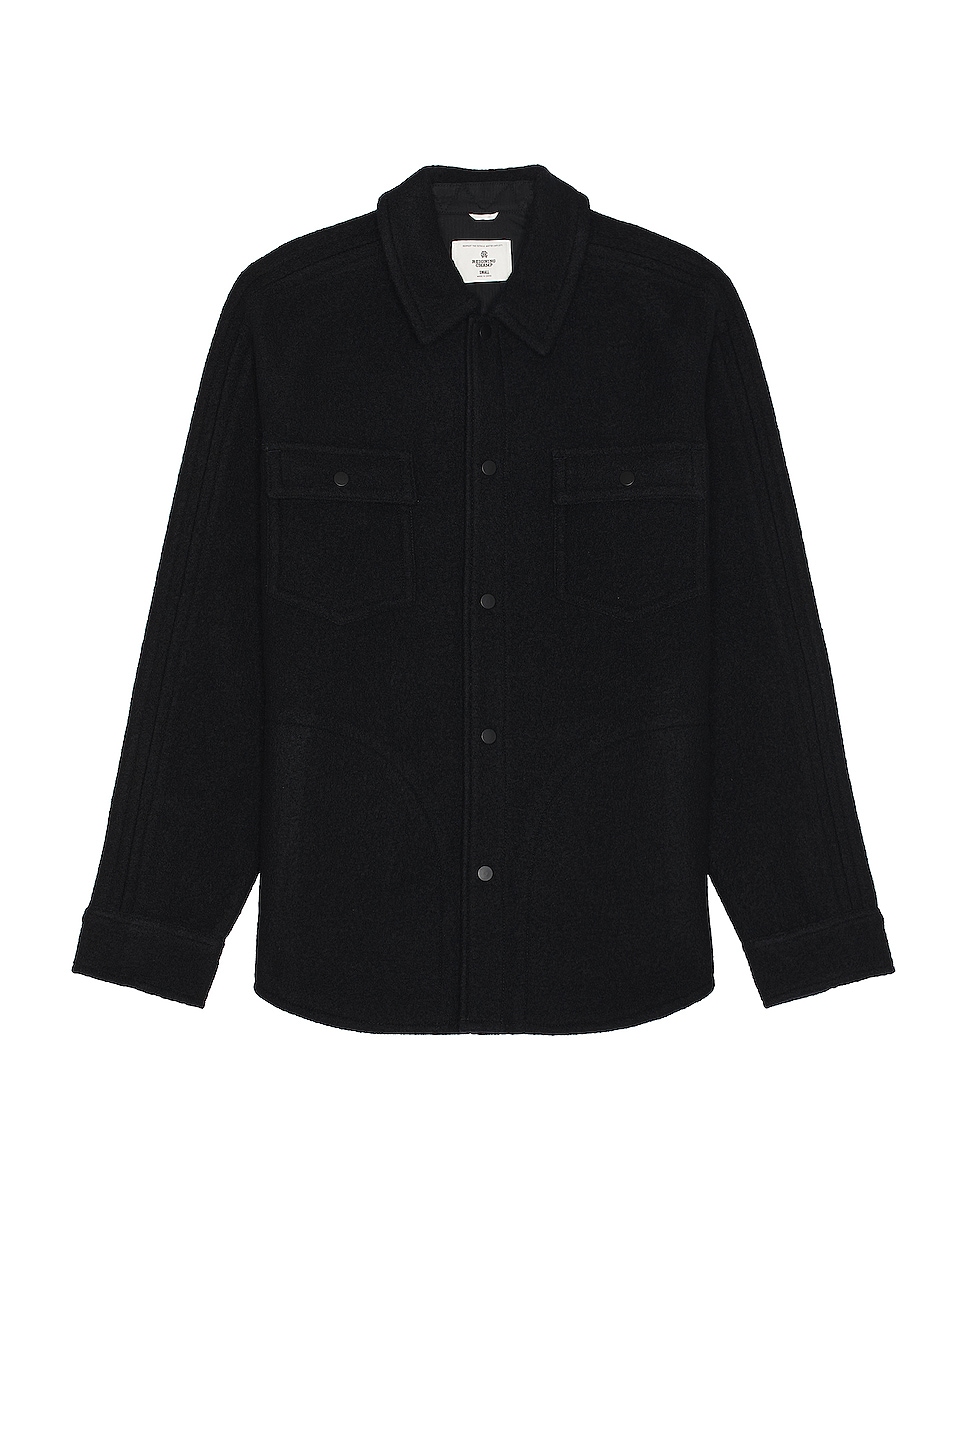 Image 1 of Reigning Champ Wool Overshirt in Black